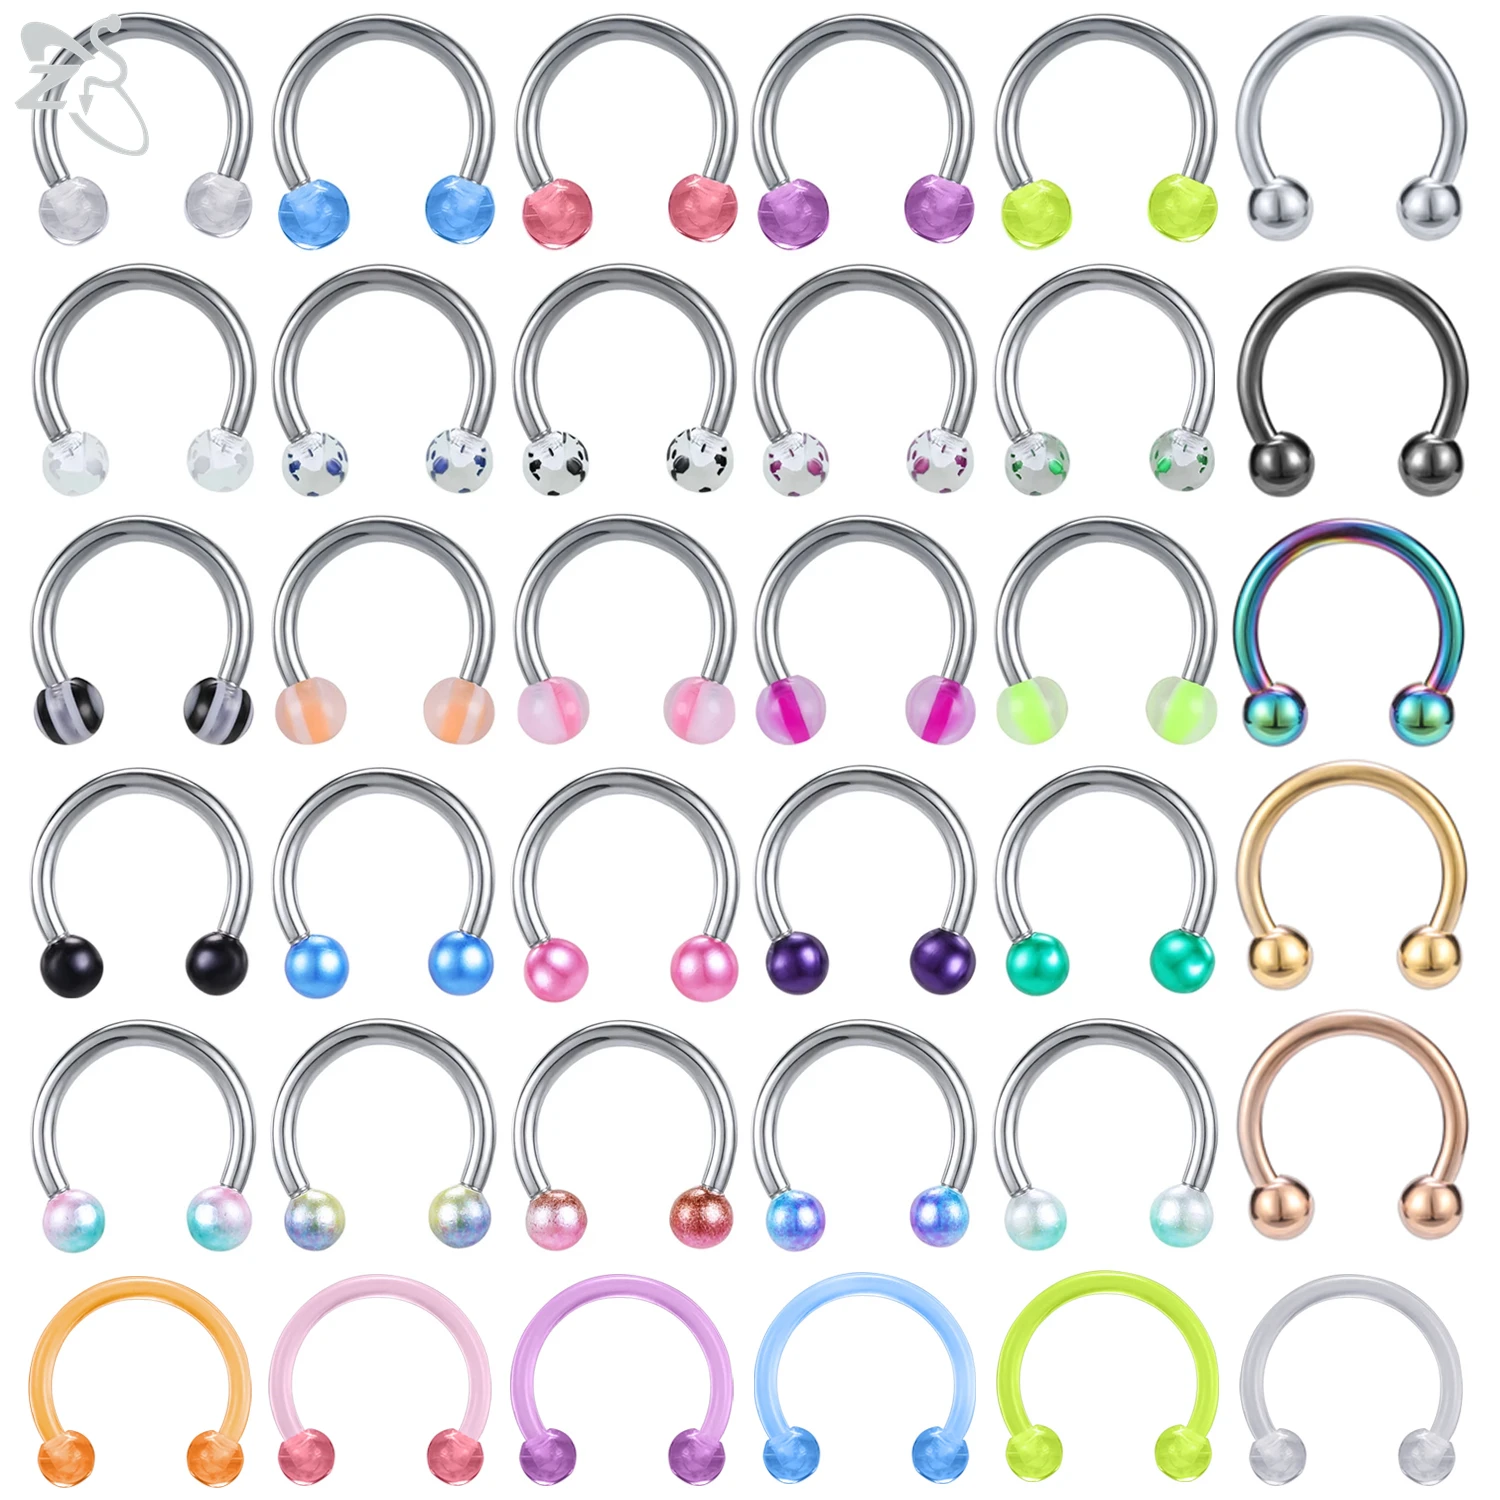 

ZS 1 PC Horseshoe Stainless Steel Nose Ring Colorful Septum Piercings 16G Ear Helix Tragus Cartilage Daith Piercing Jewelry 8MM